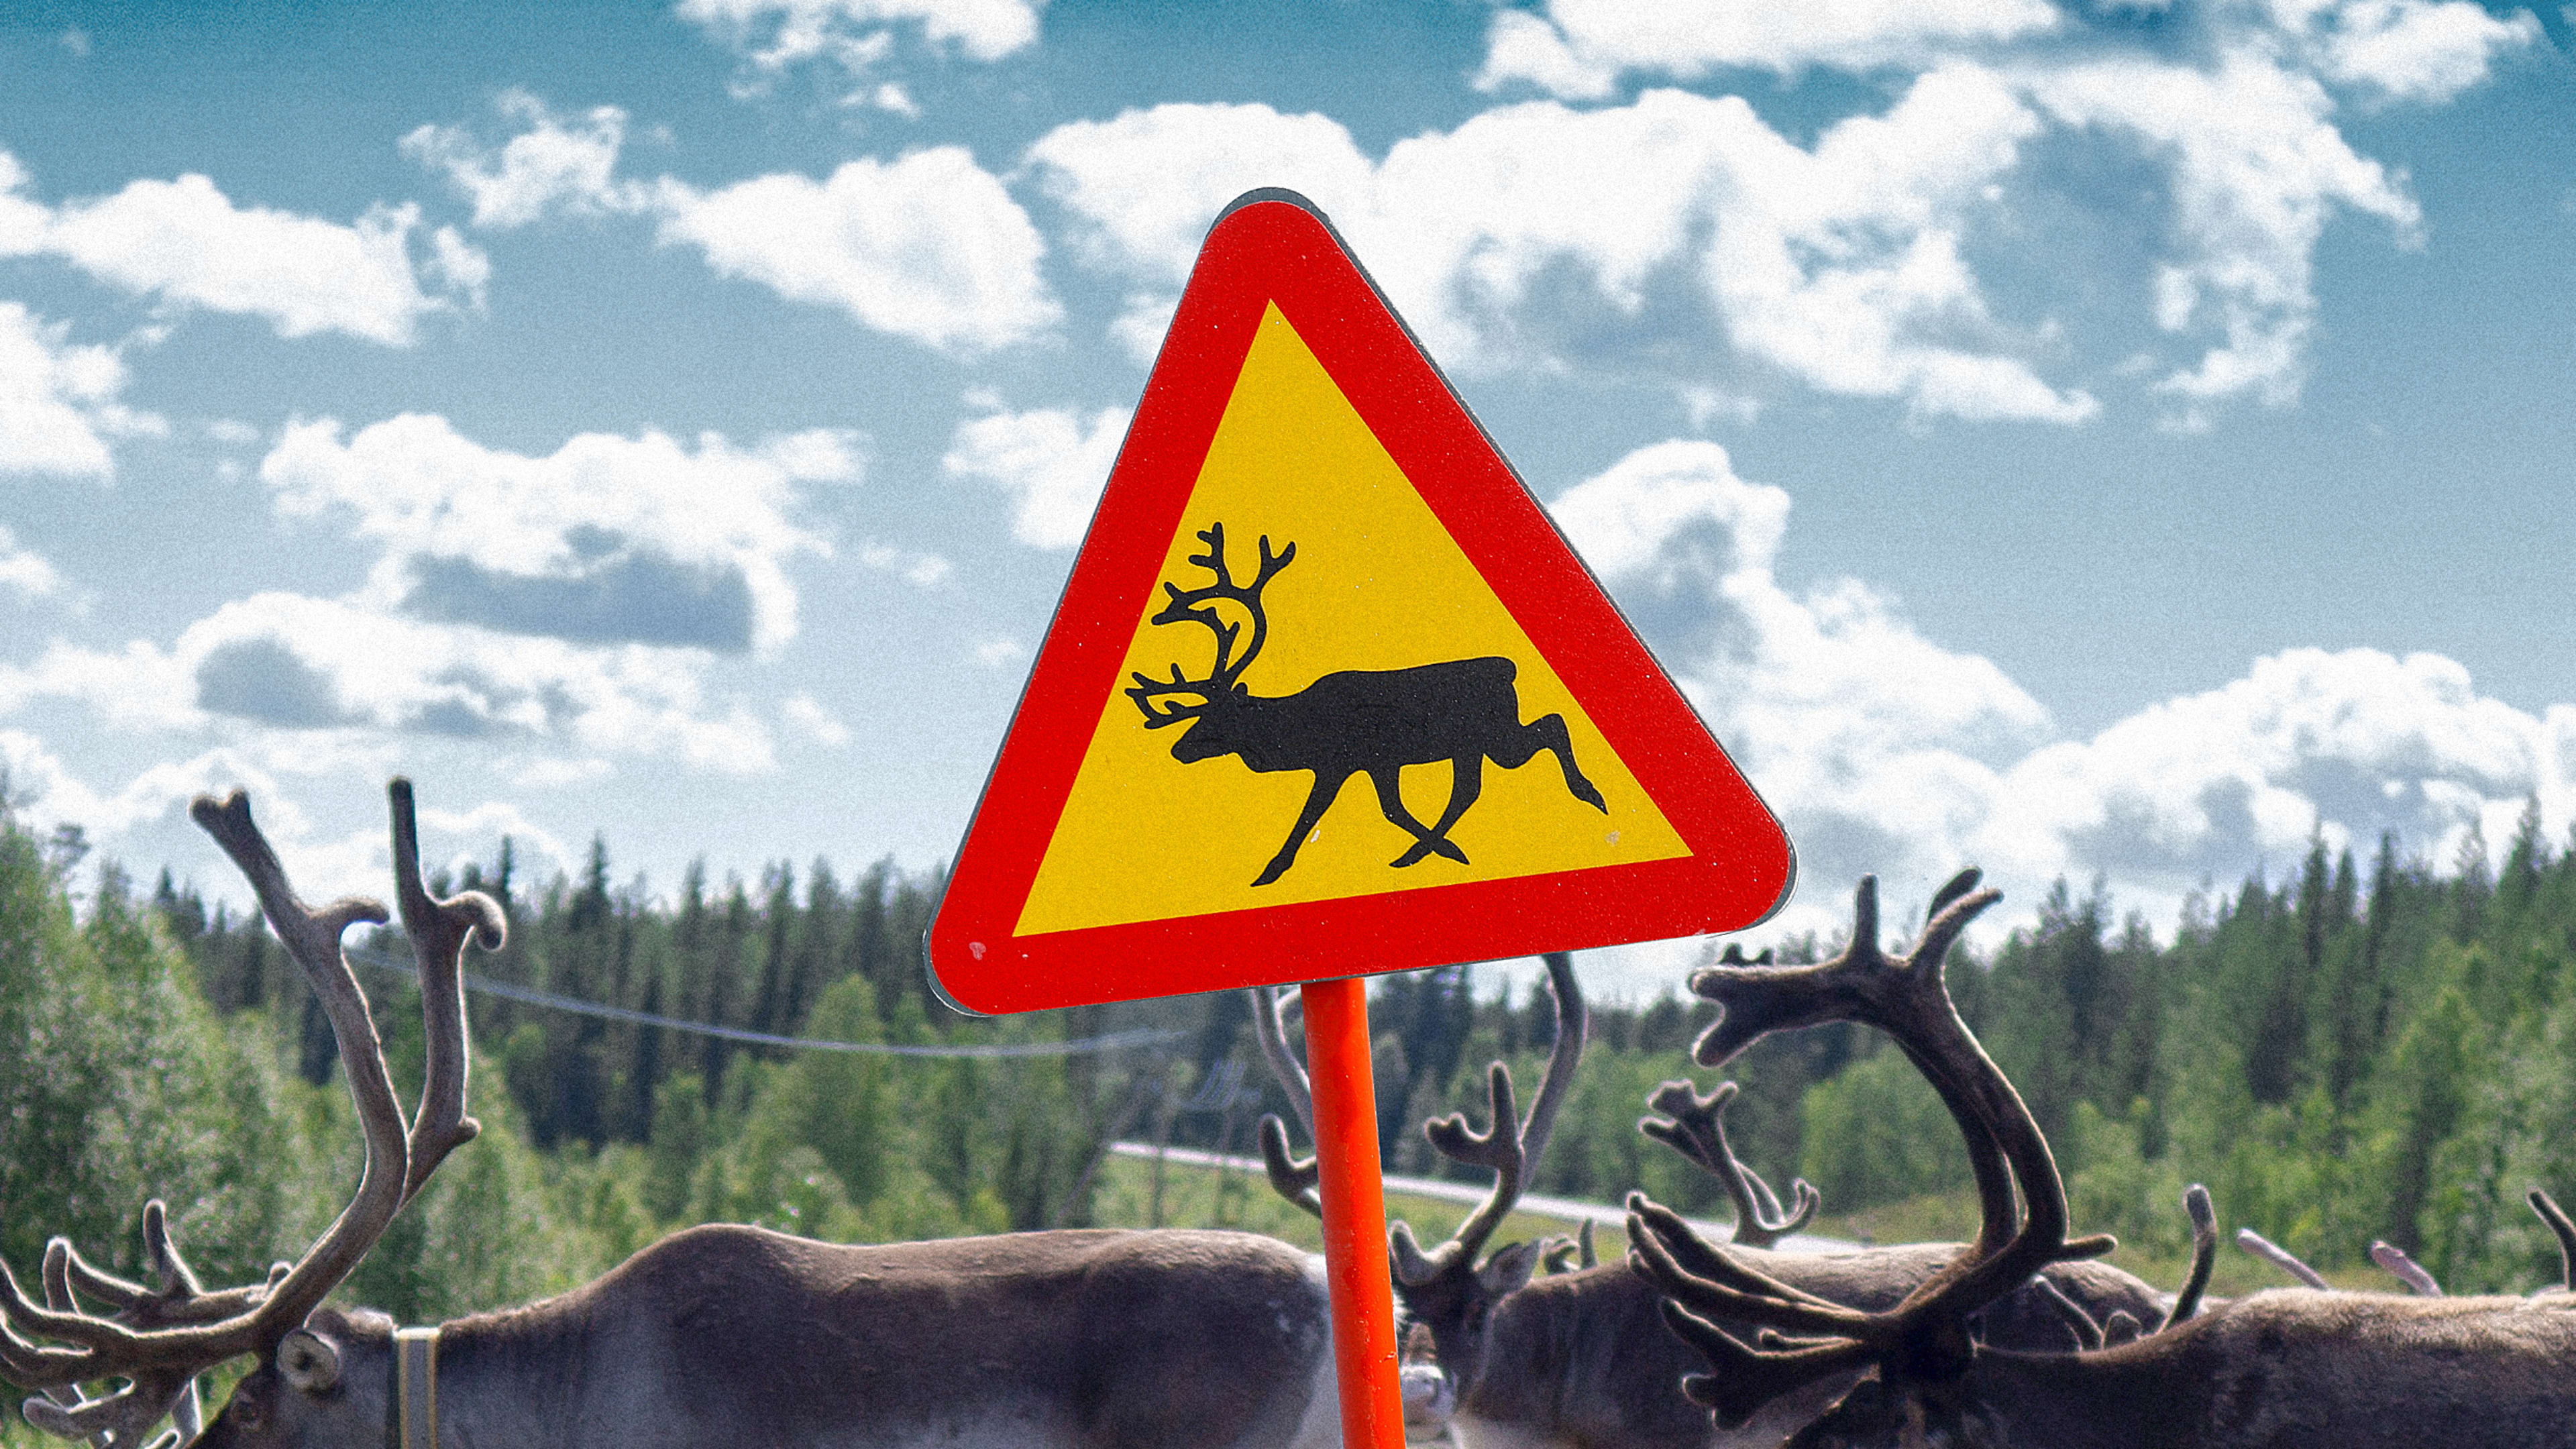 Reindeer need infrastructure, too. These bridges are just for them